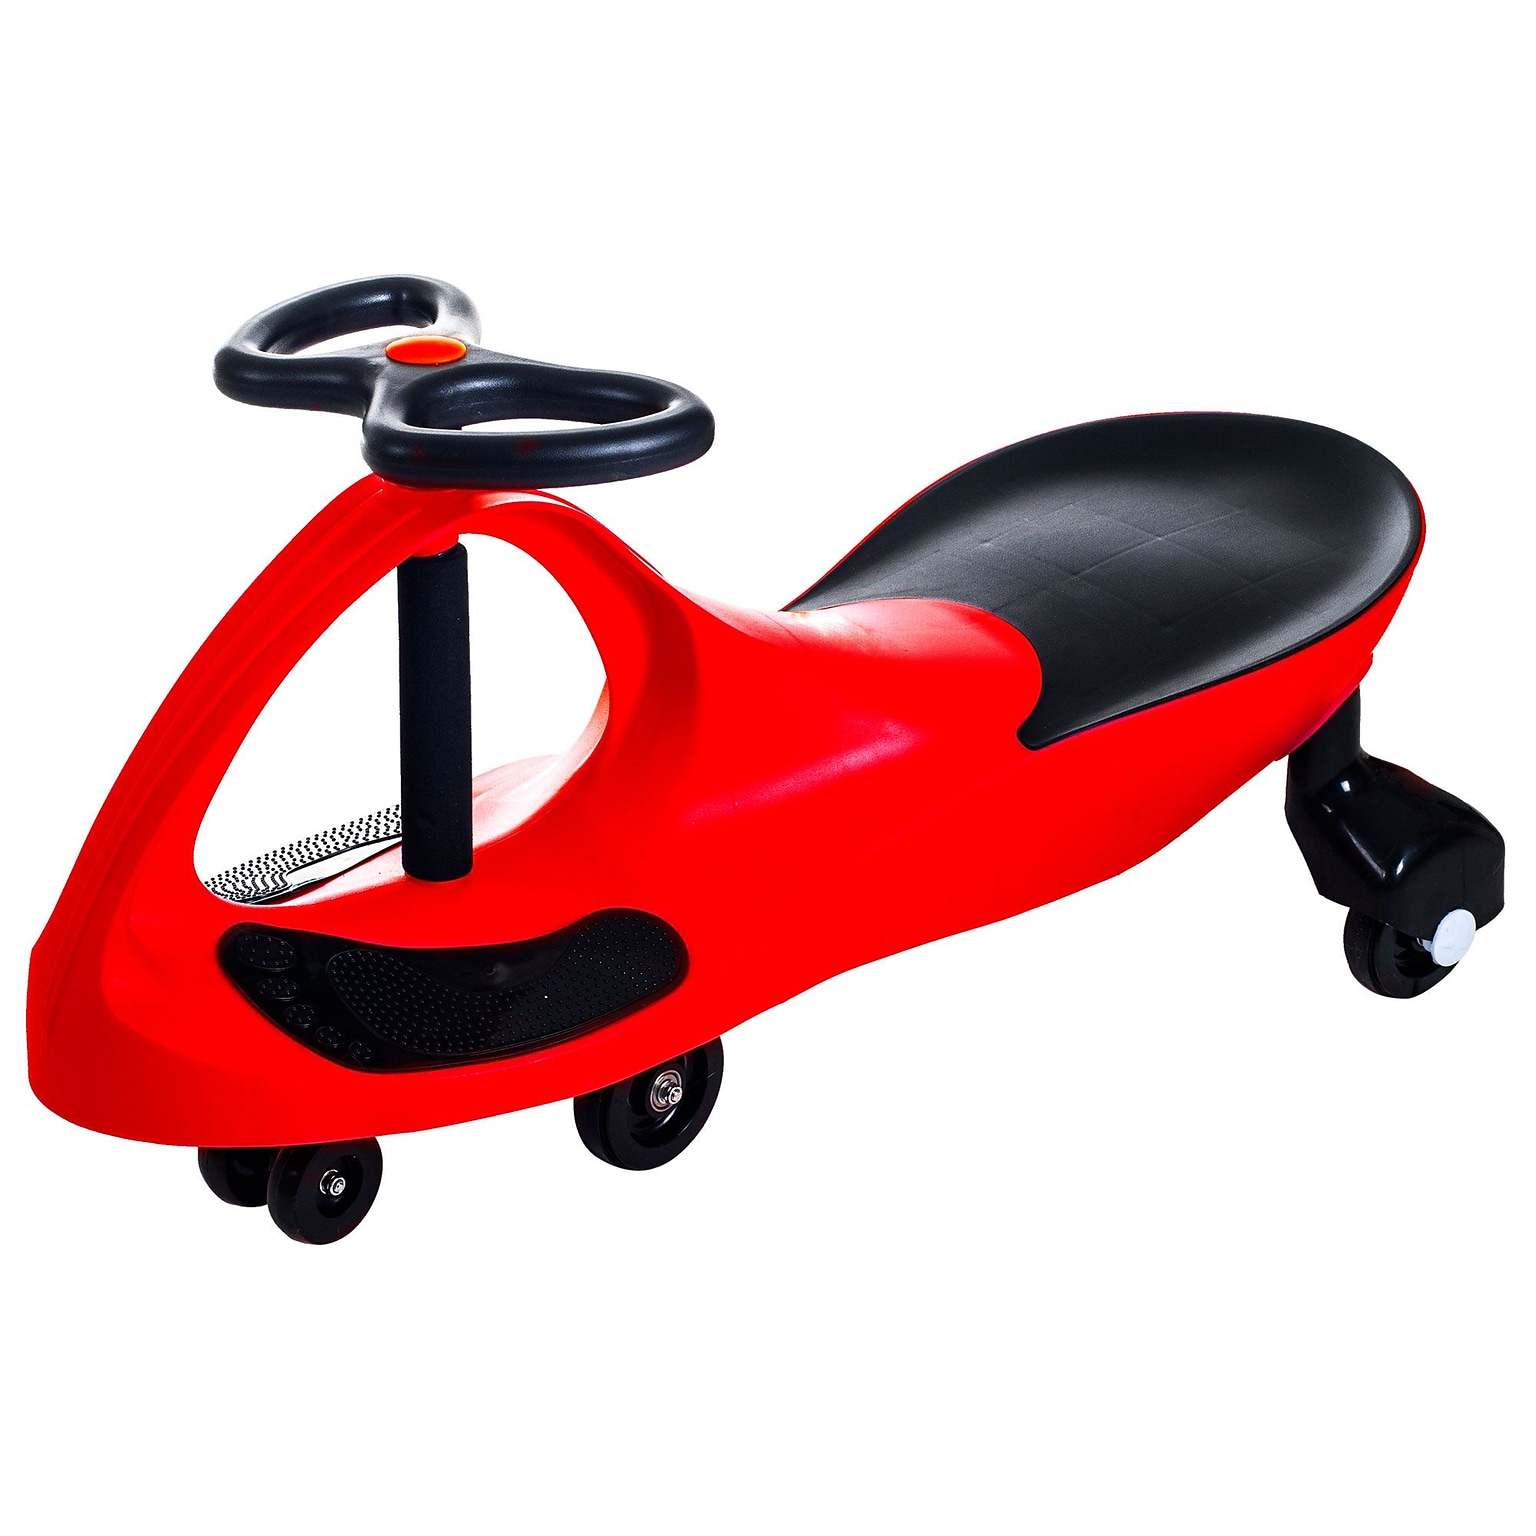 Lil Rider Red Wiggle Ride-on Car, Red (886511397828)